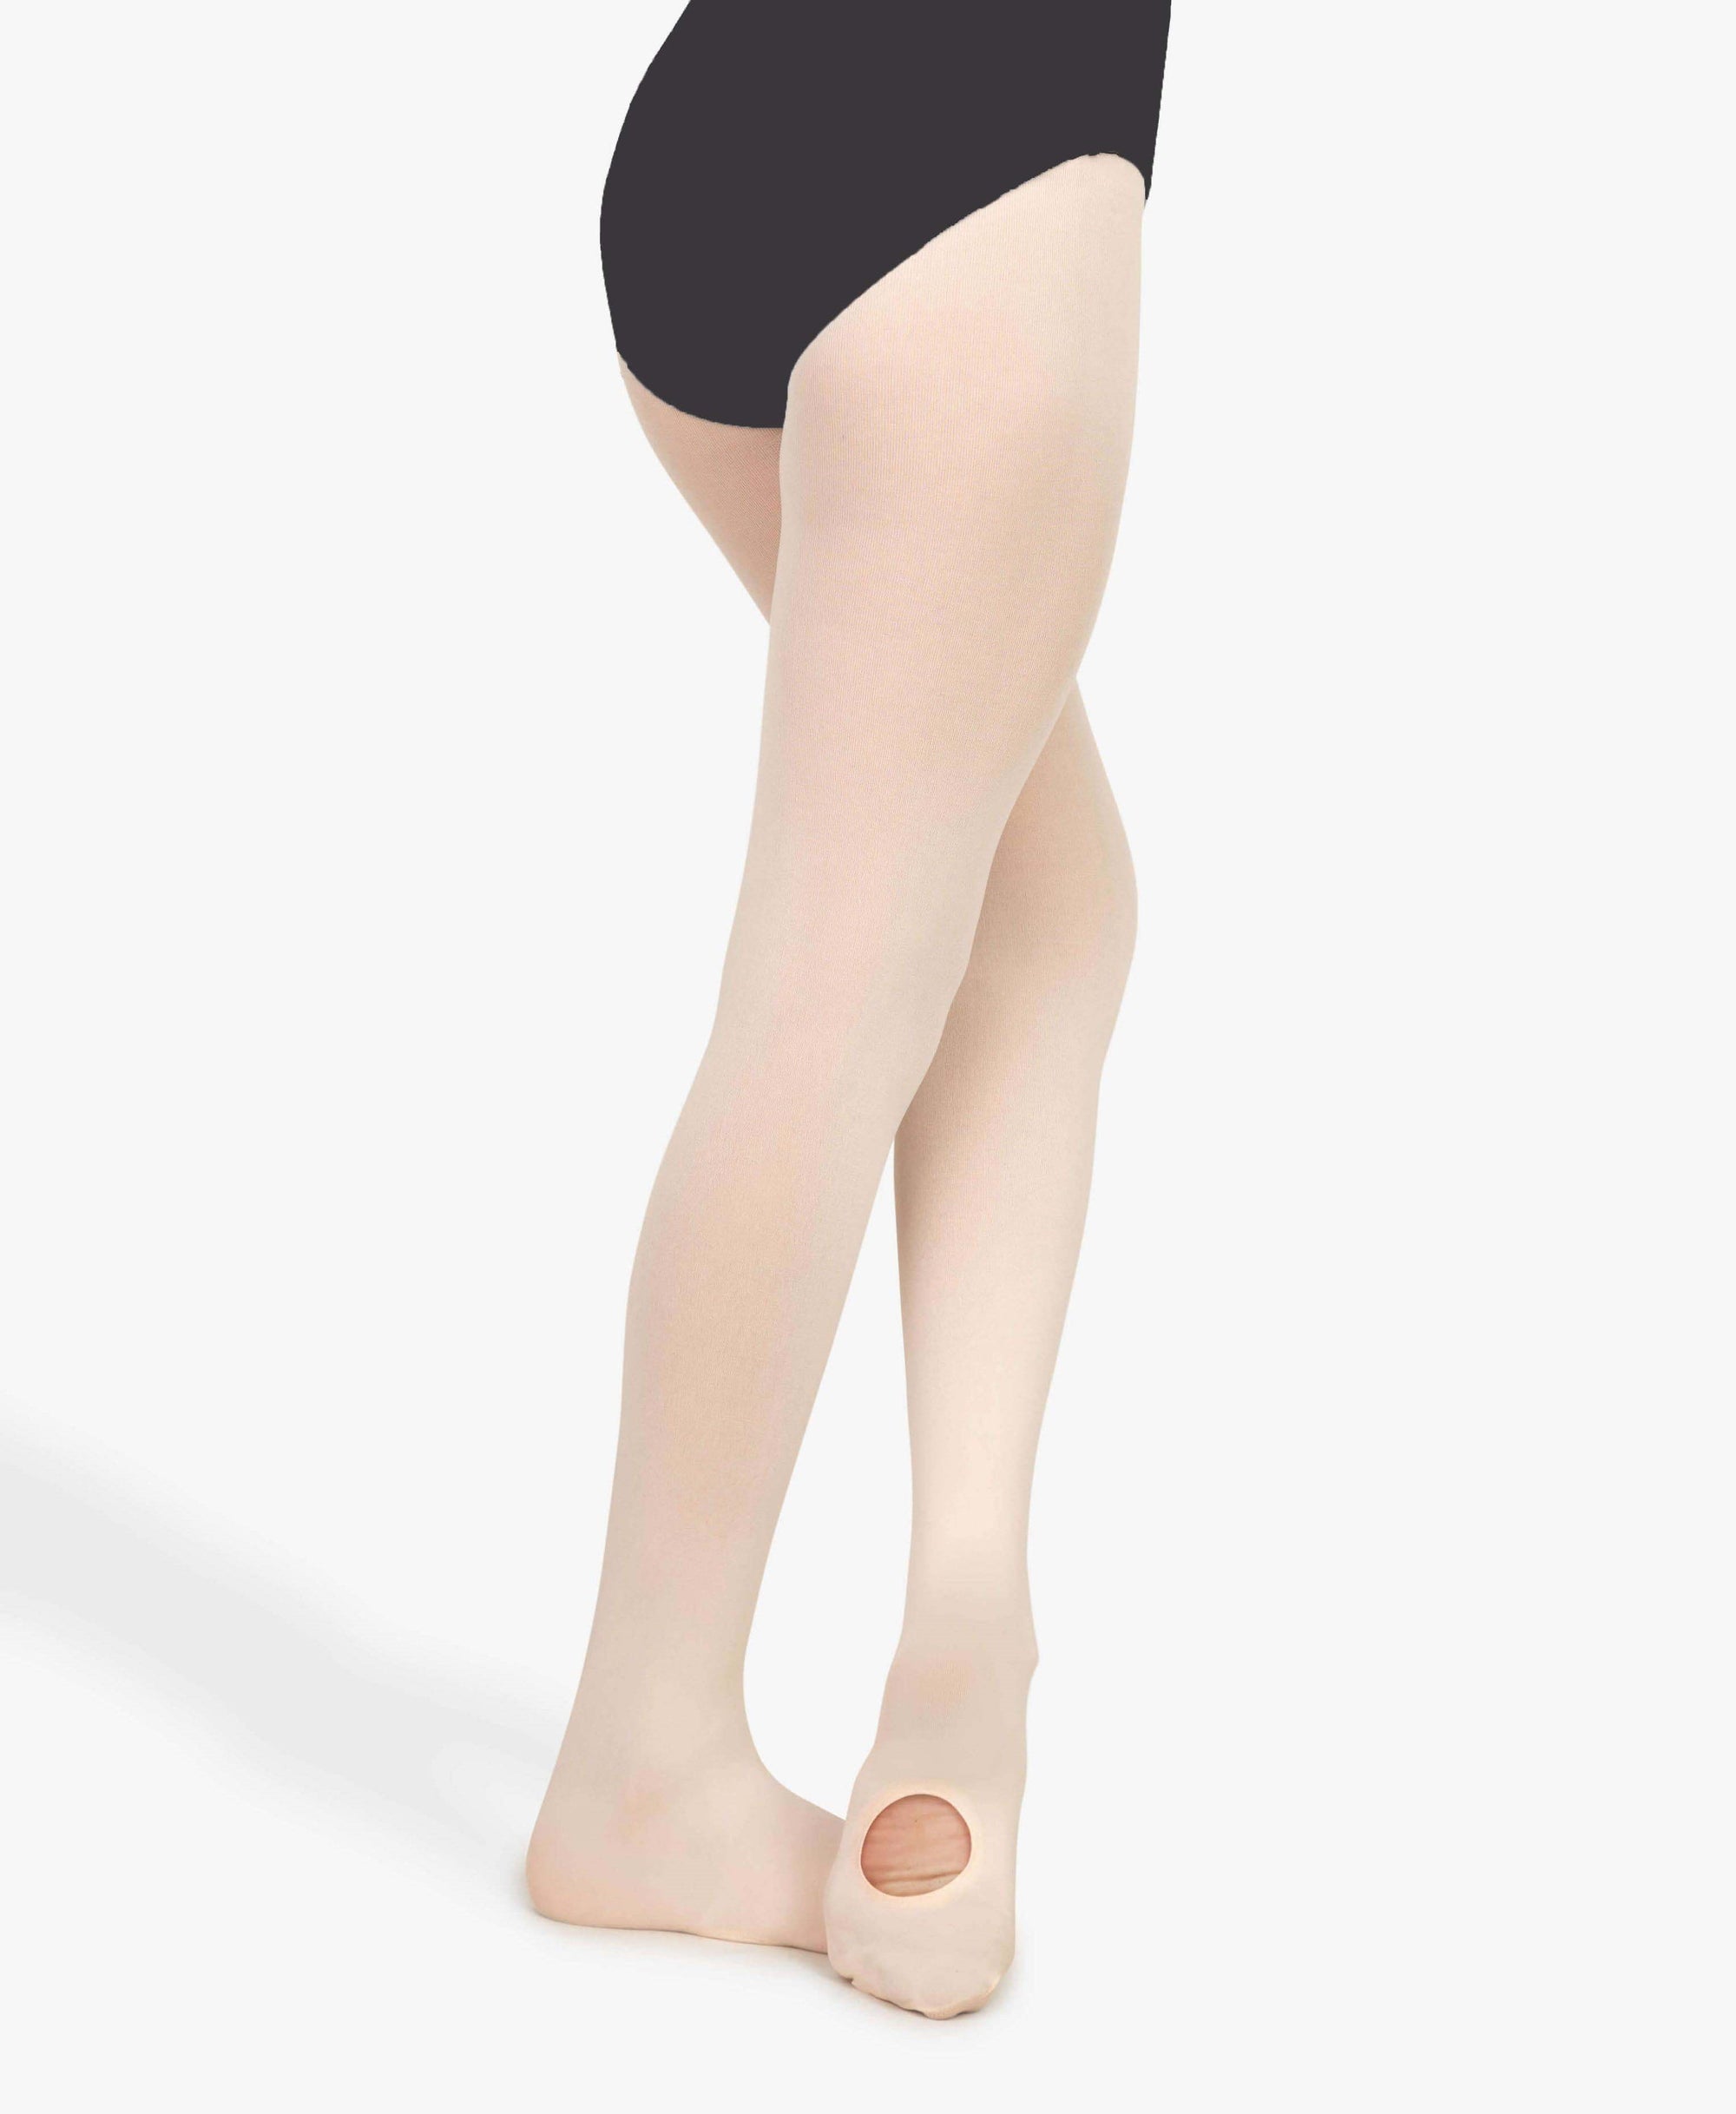 Professional-grade ballet tights for adults